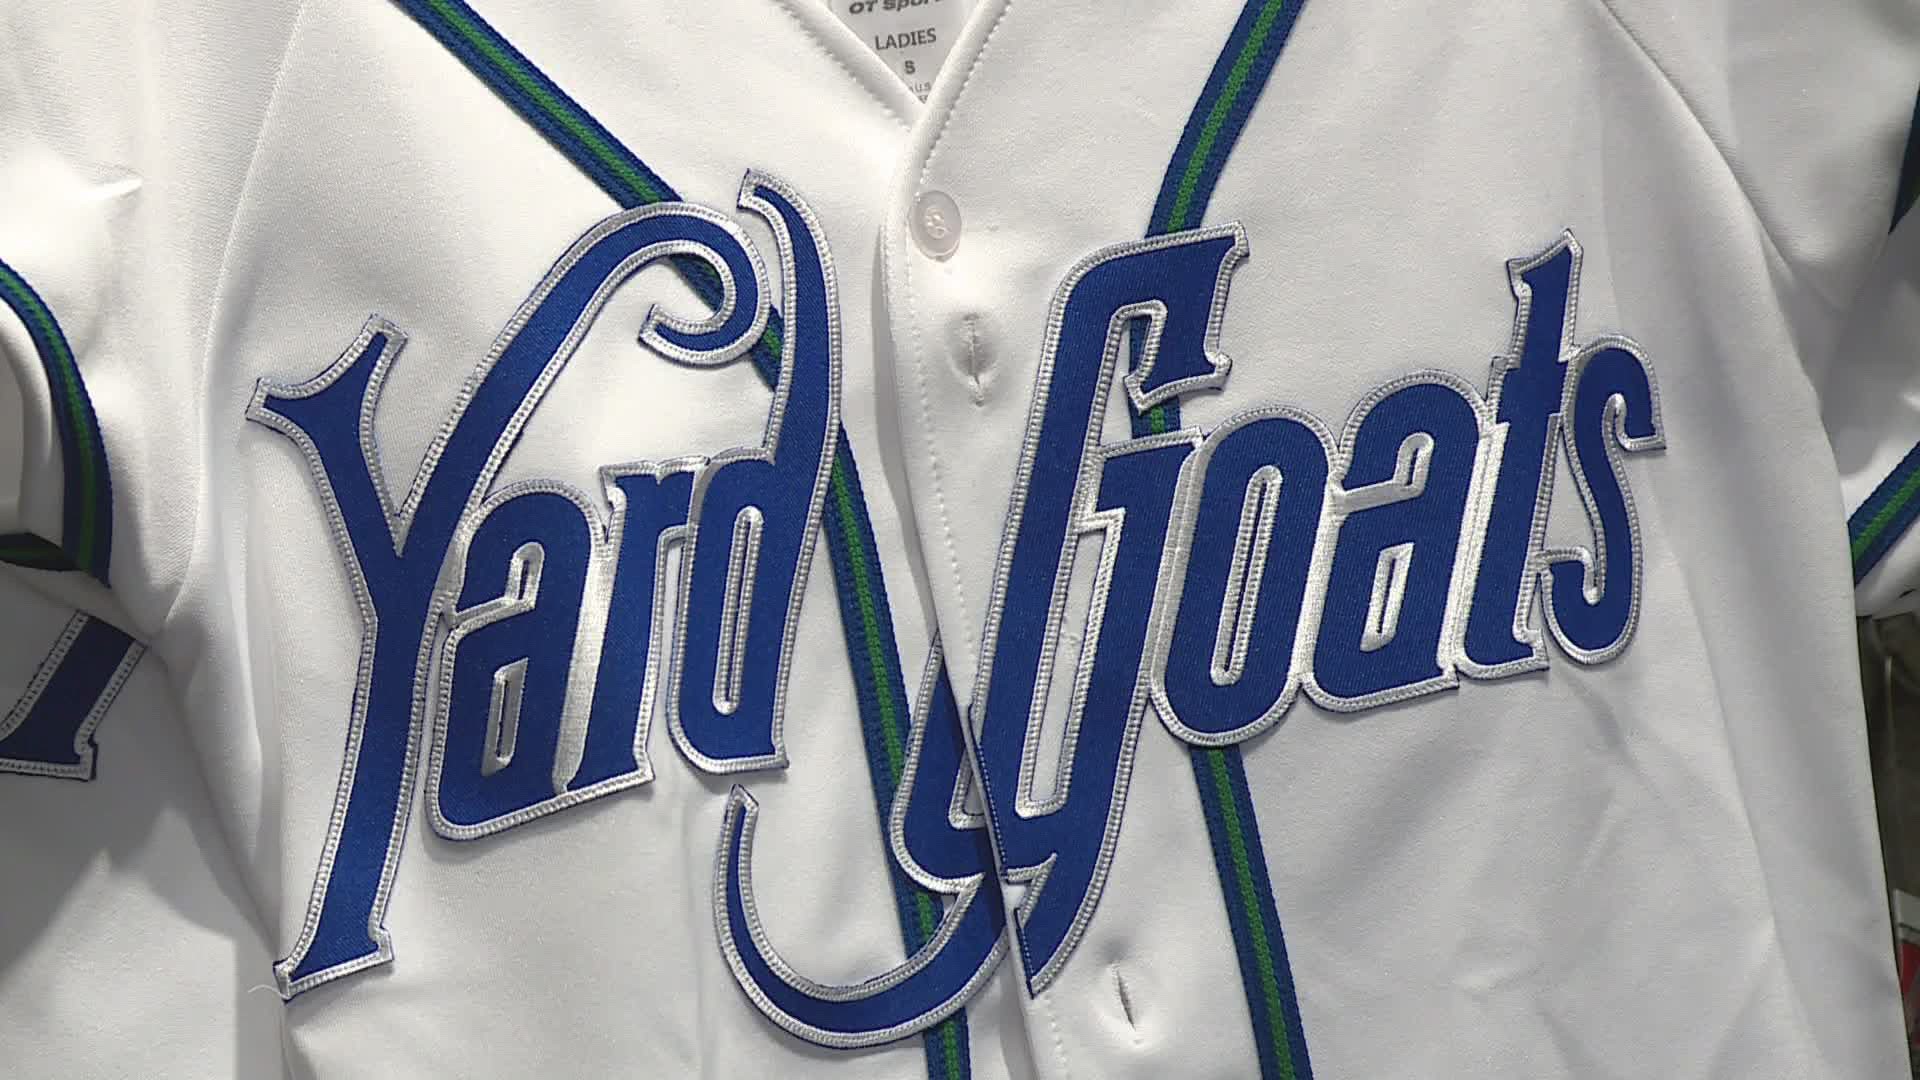 The Hartford Yard Goats released their own statement saying fans who purchased tickets for the current season will be contacted by an organization representative.